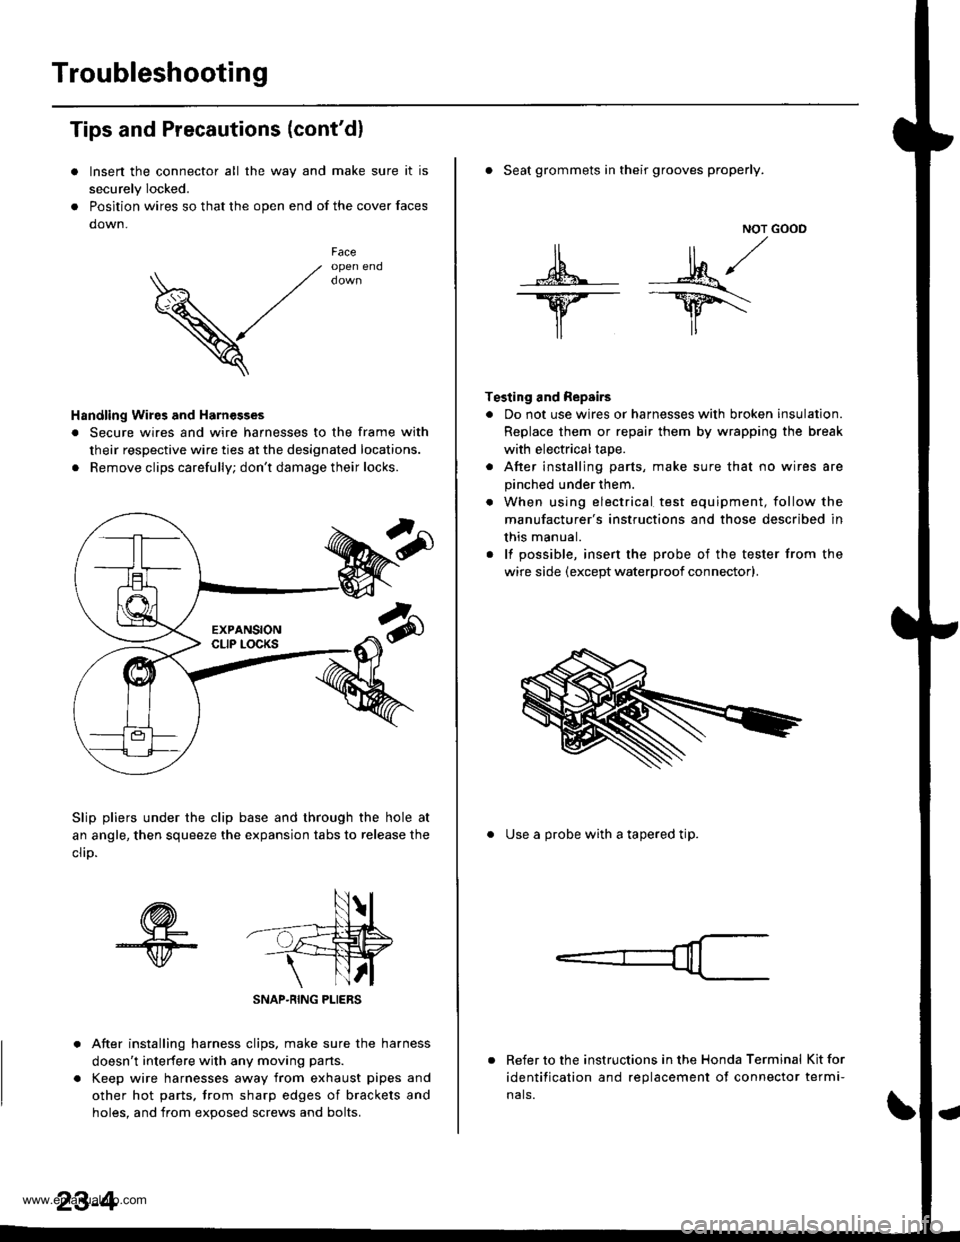 HONDA CR-V 1999 RD1-RD3 / 1.G Workshop Manual 
Troubleshooting
Tips and Precautions (contdl
Insen the connector all the way and make sure it is
securely Iocked.
Position wires so that the open end of the cover faces
down.
V
Faceopen end
Handling